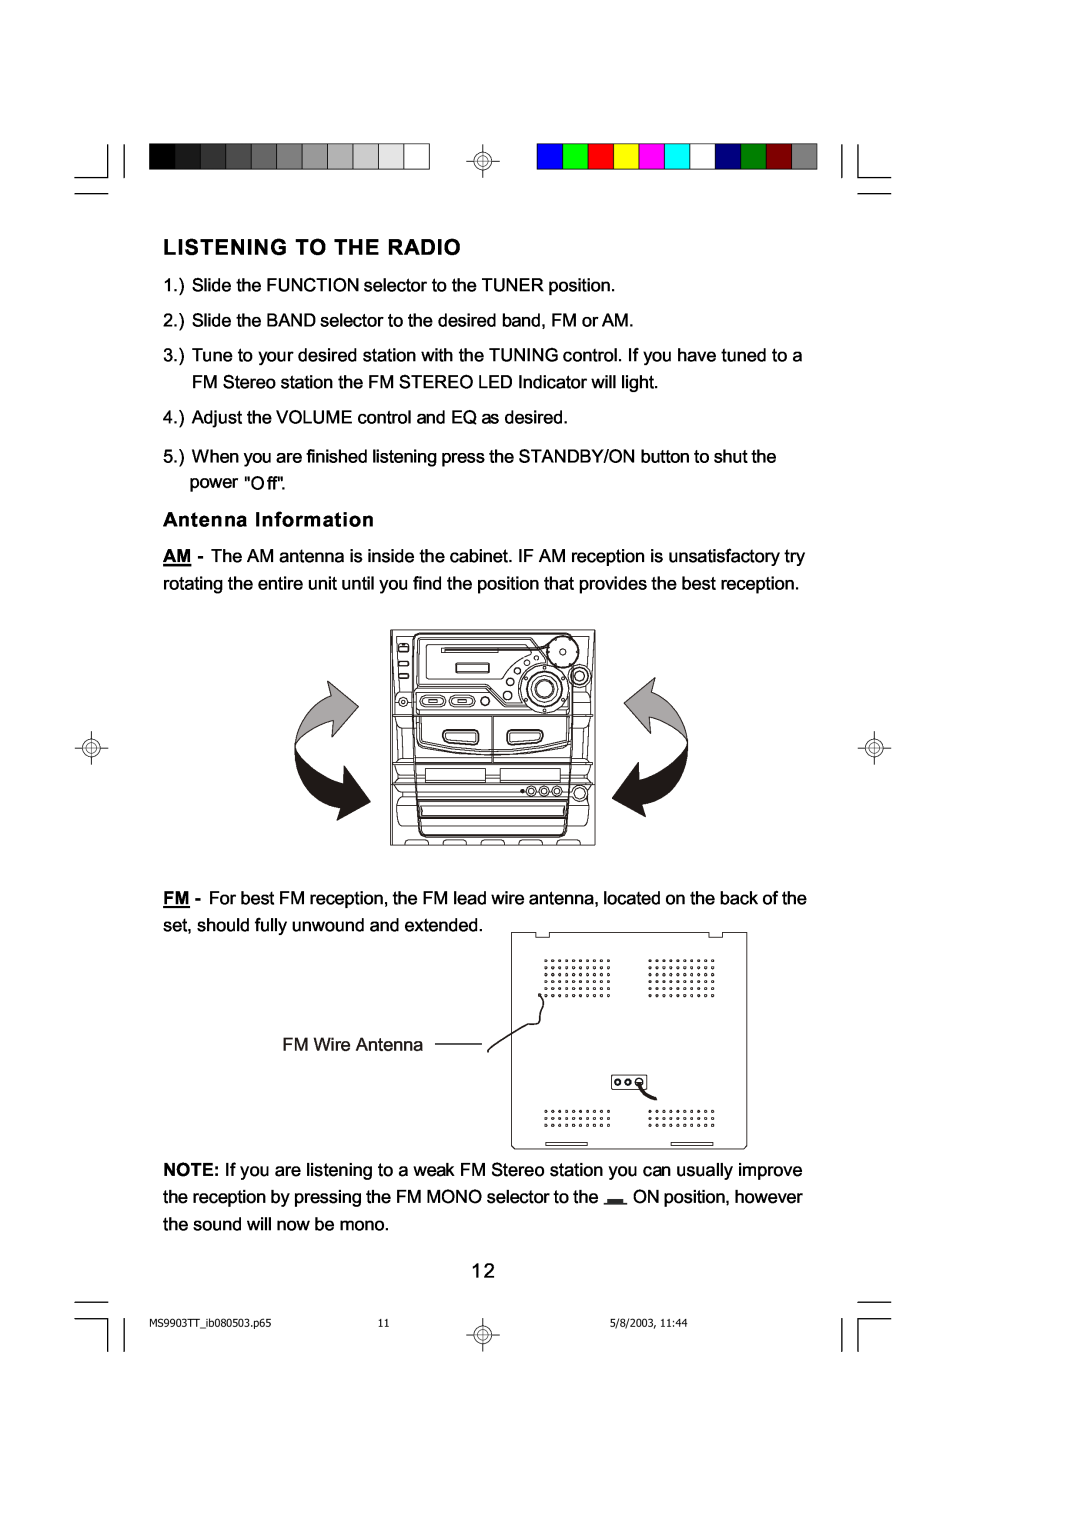 Emerson MS9904TTC owner manual Listening To The Radio, Antenna Information, FM Wire Antenna 